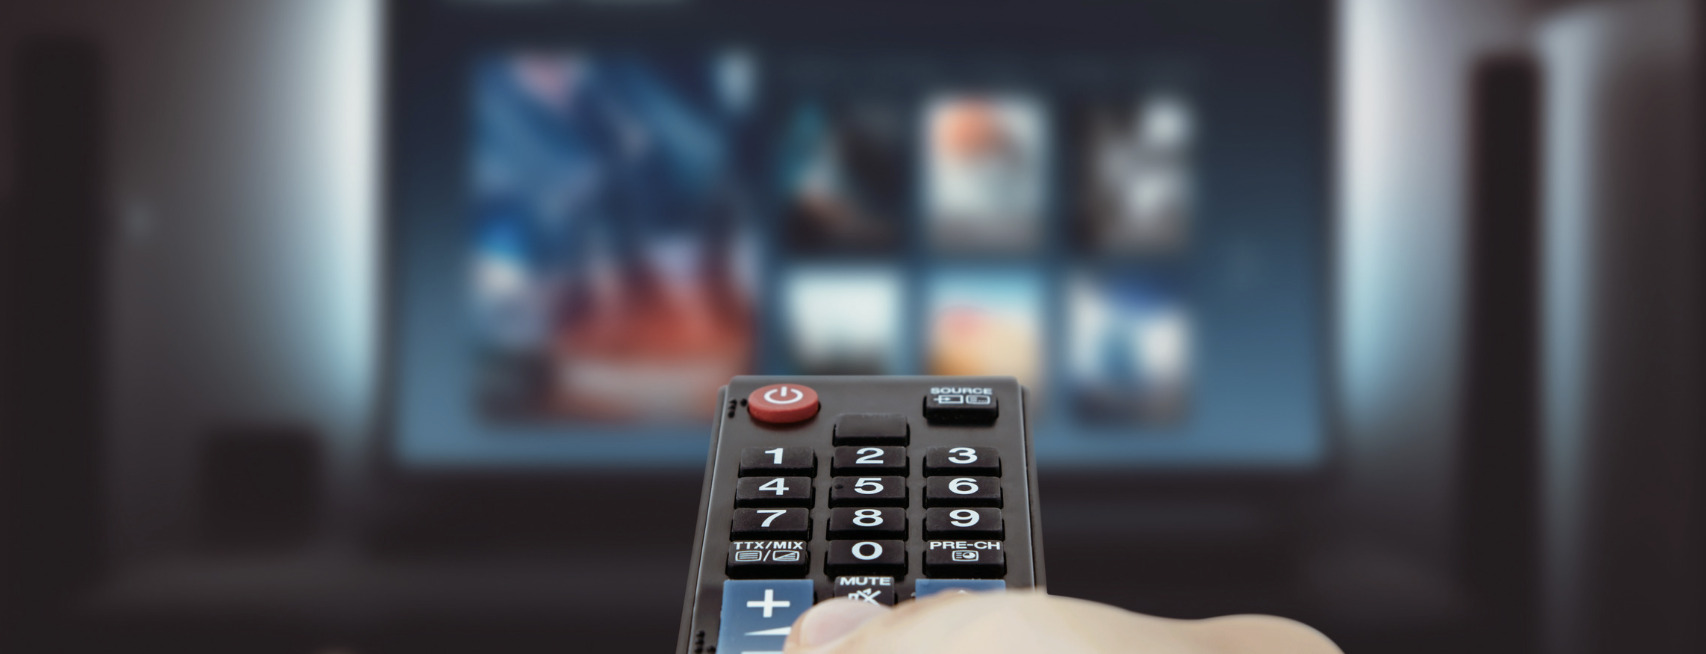 What is the future of the Television and Video Industry?